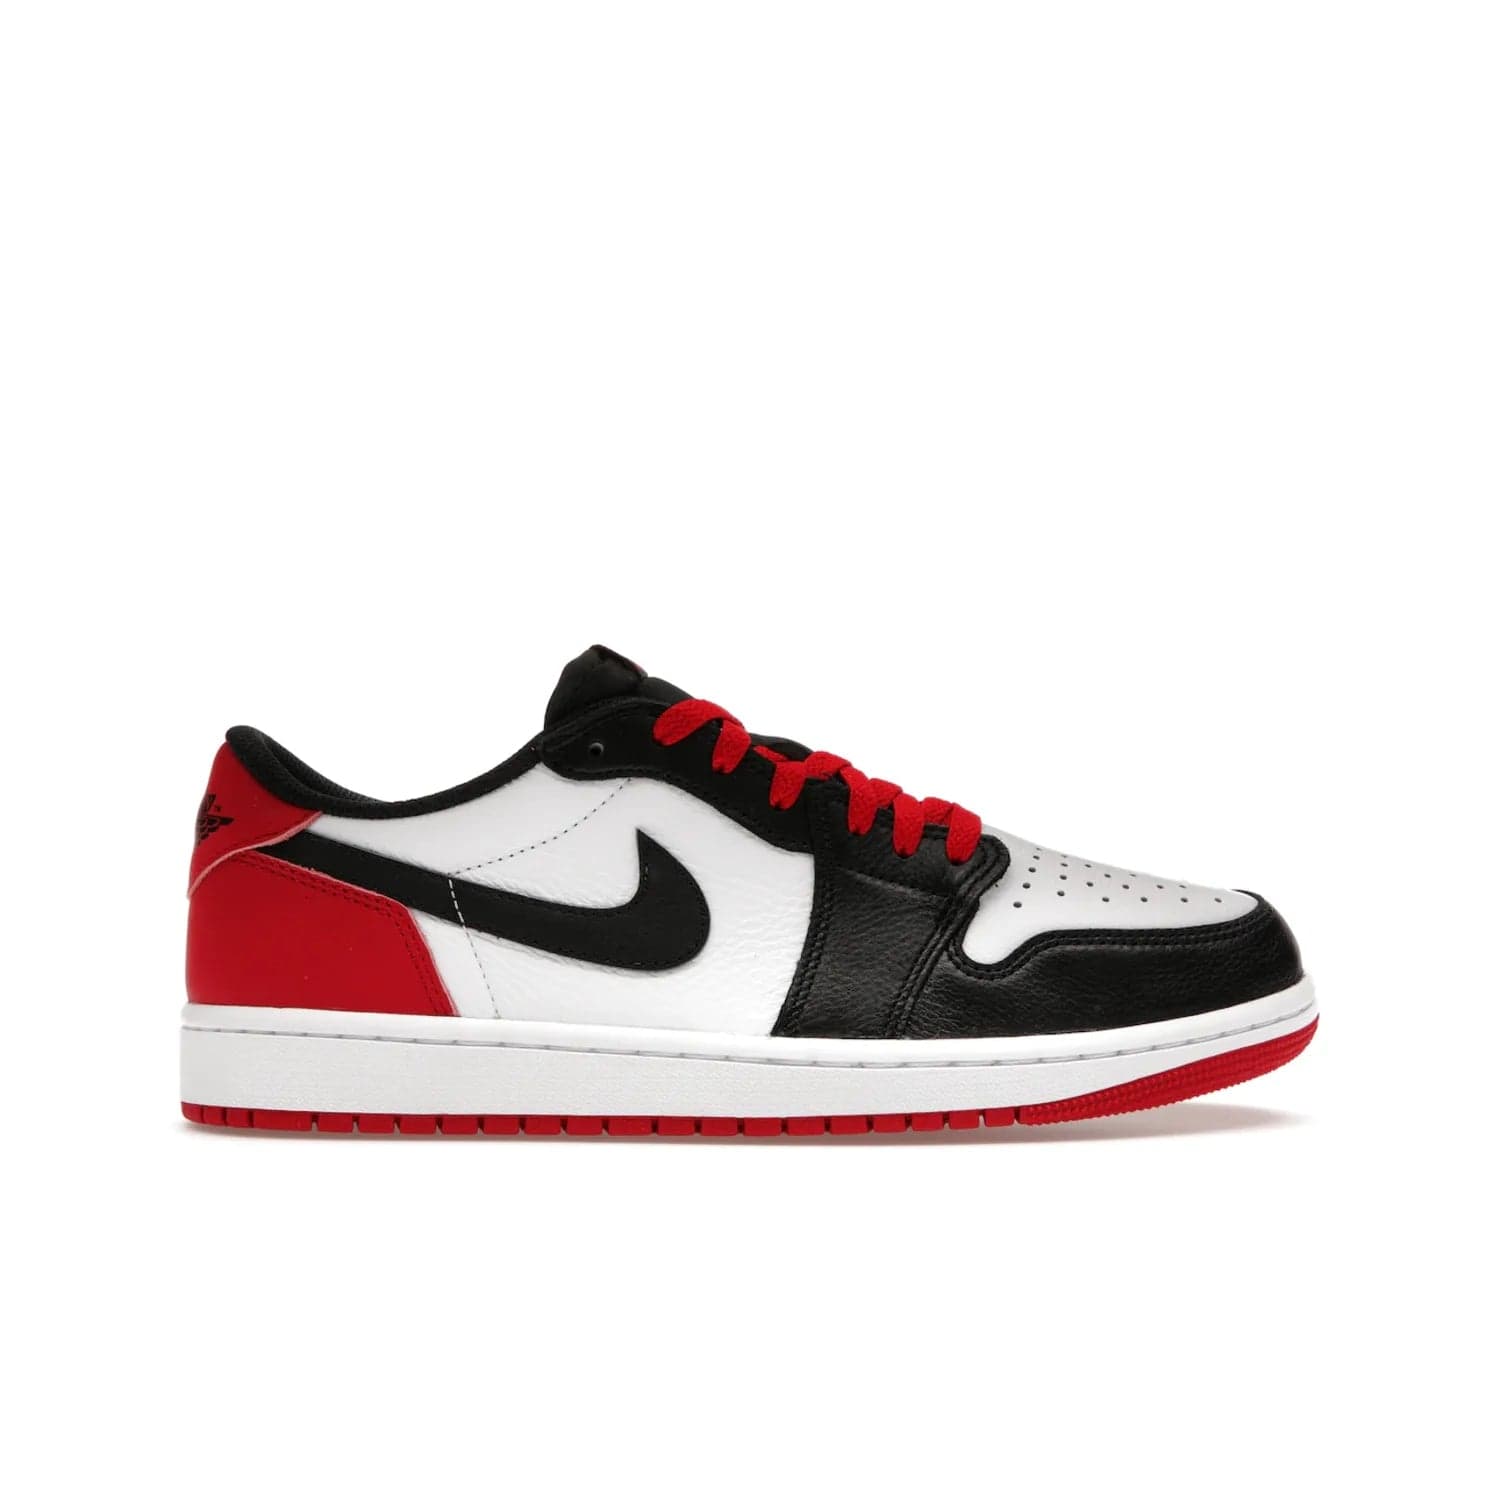 Jordan 1 Retro Low OG Black Toe (2023) (GS) - Image 1 - Only at www.BallersClubKickz.com - Iconic colorway and classic styling: Get the Jordan 1 Retro Low OG Black Toe (2023) (GS) on 2023-08-04! White leather upper with black and varsity red overlays create a timeless look. Low cut for comfortable fit.